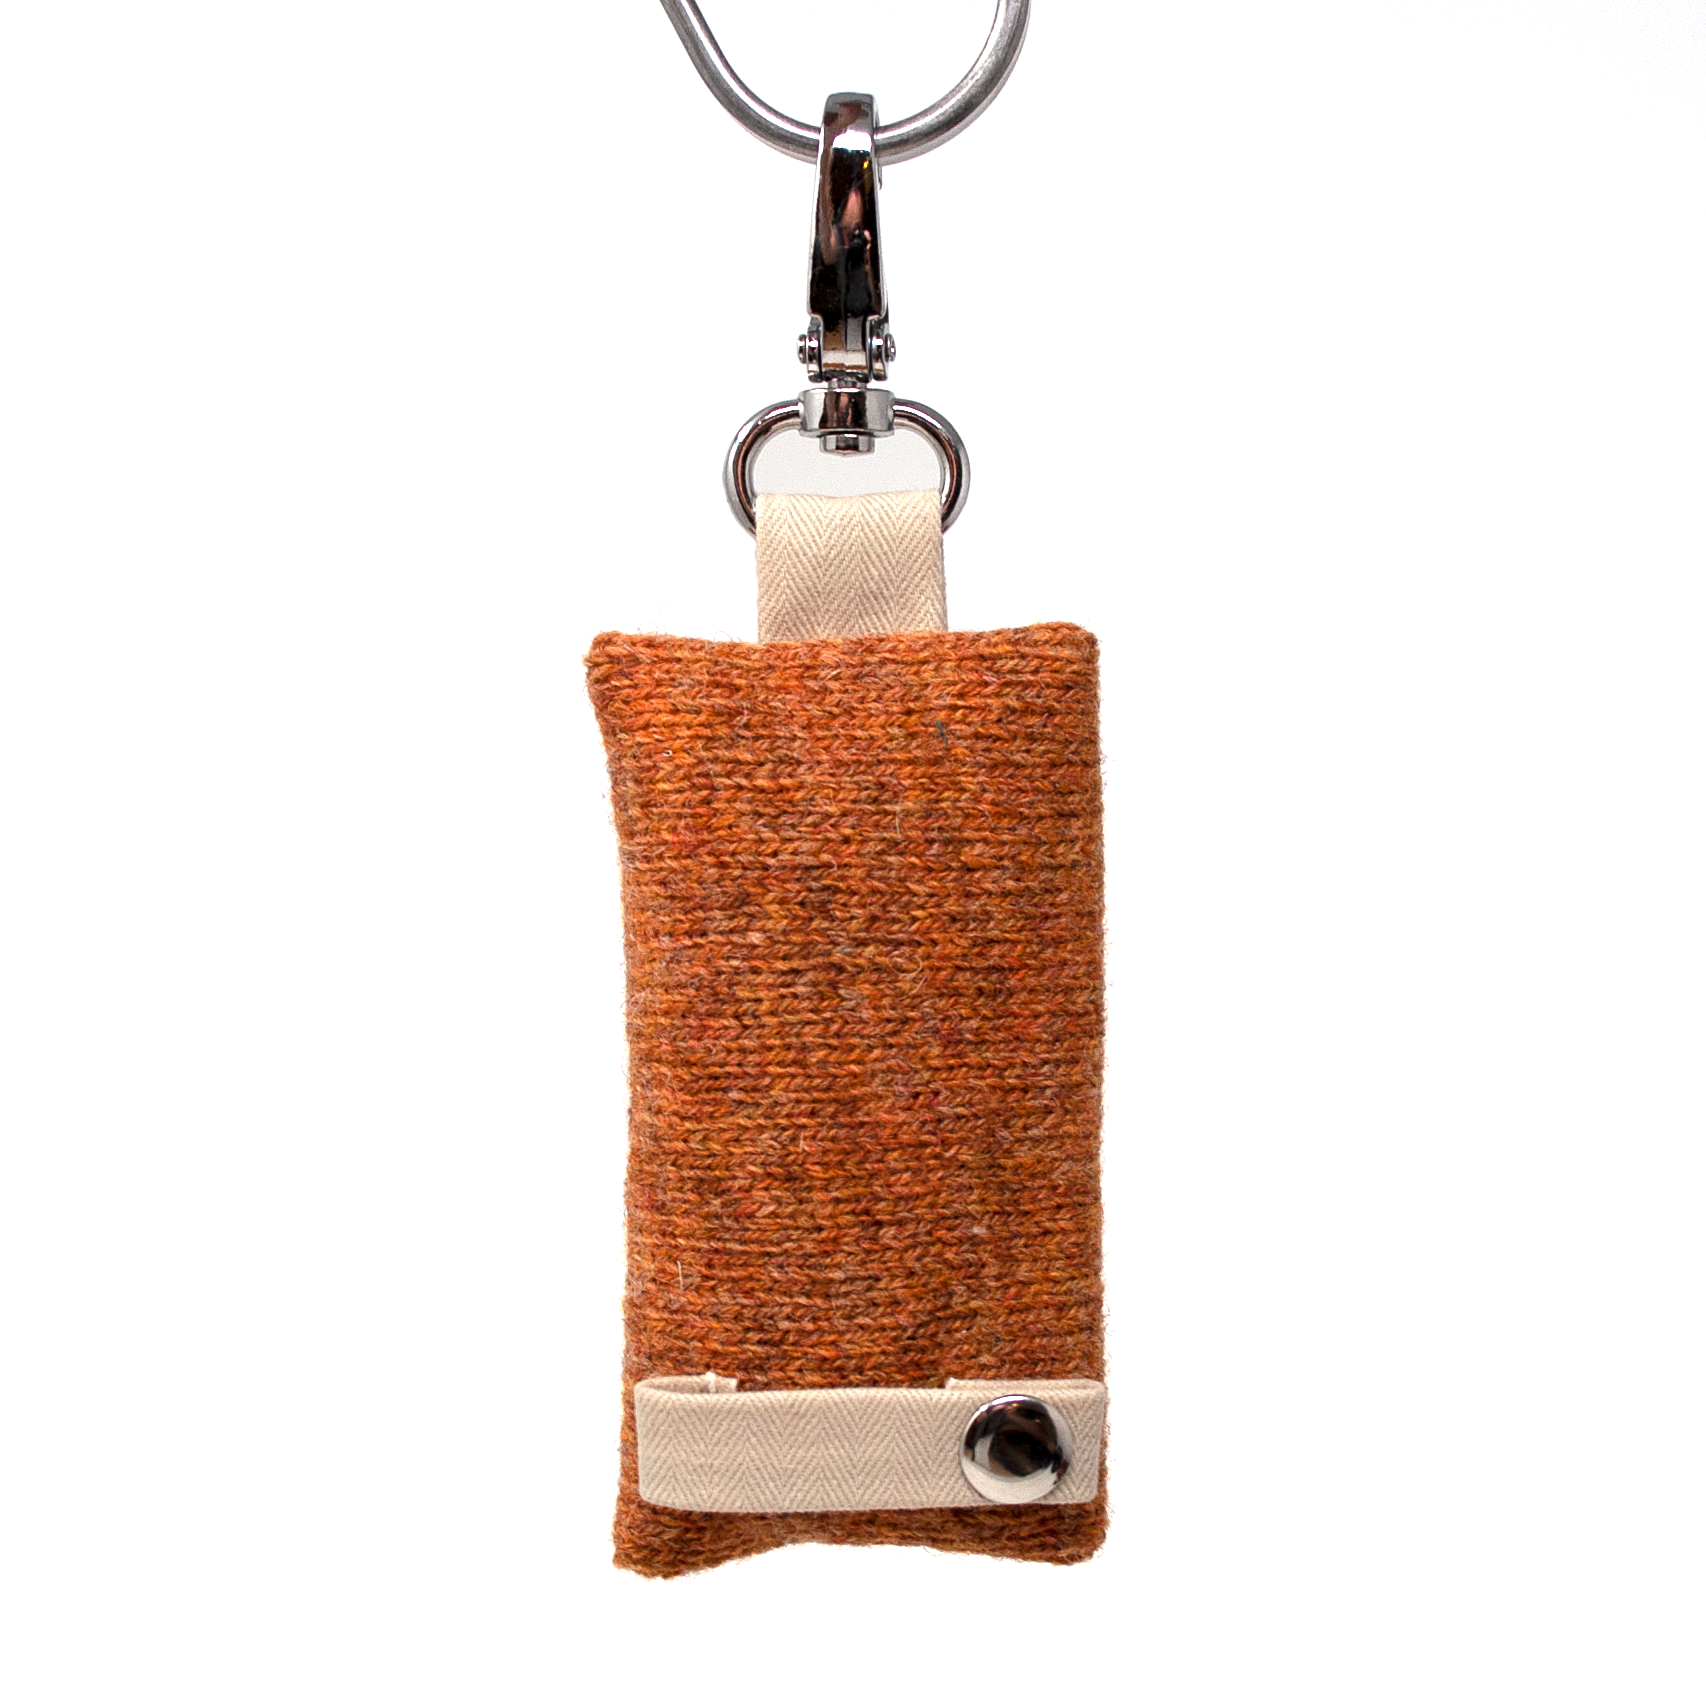 Copper - Autumn/Winter '23 Collection - Luxury Poo Bag Holder